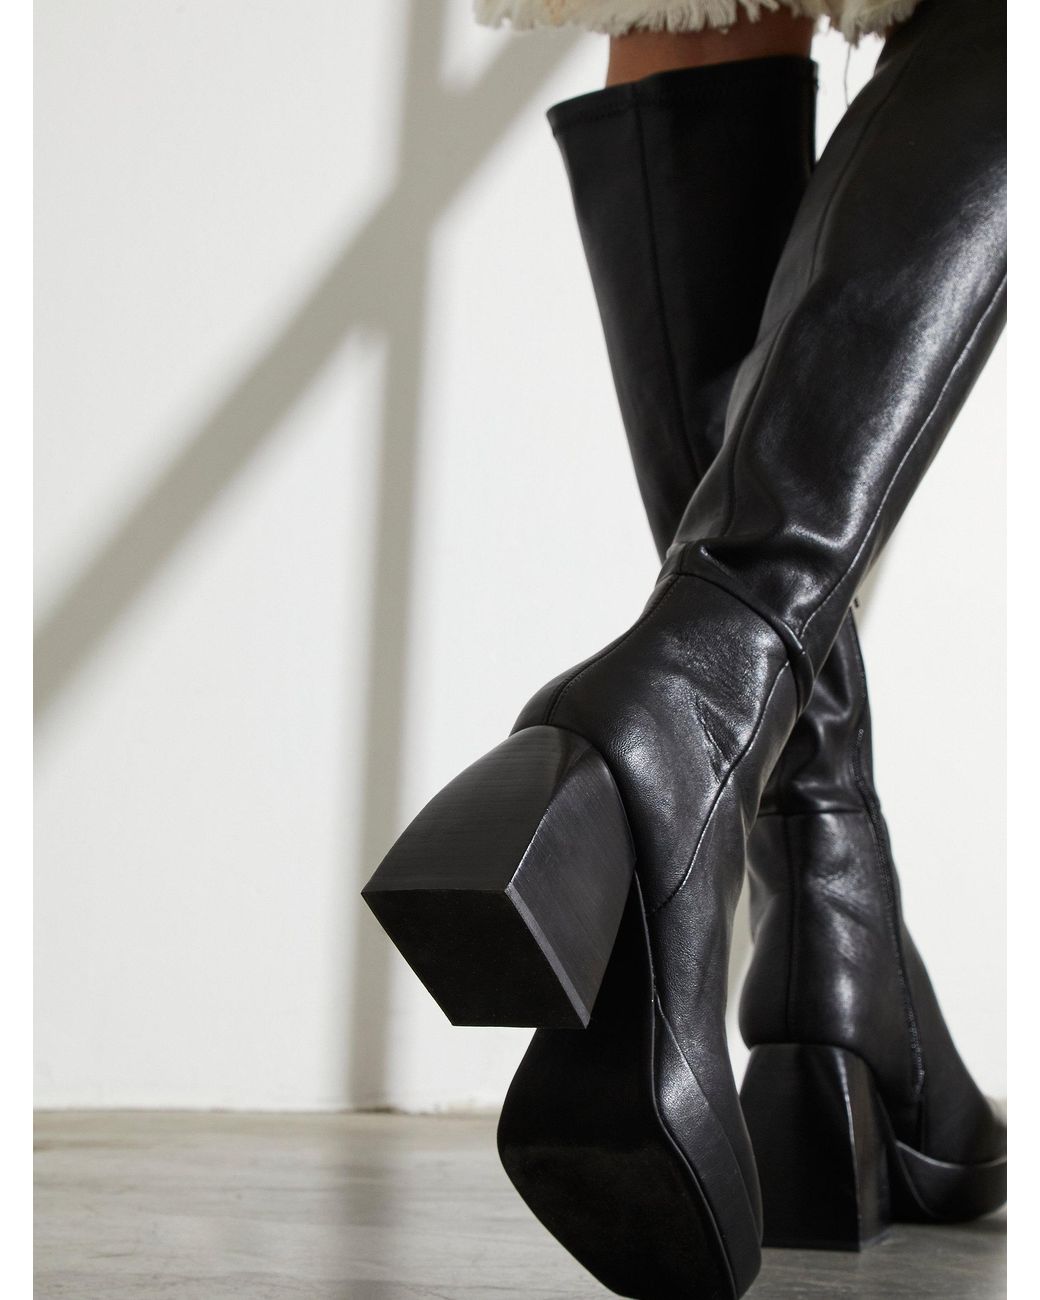 Free People Daphne Second Skin Platform Boots in Black | Lyst Canada